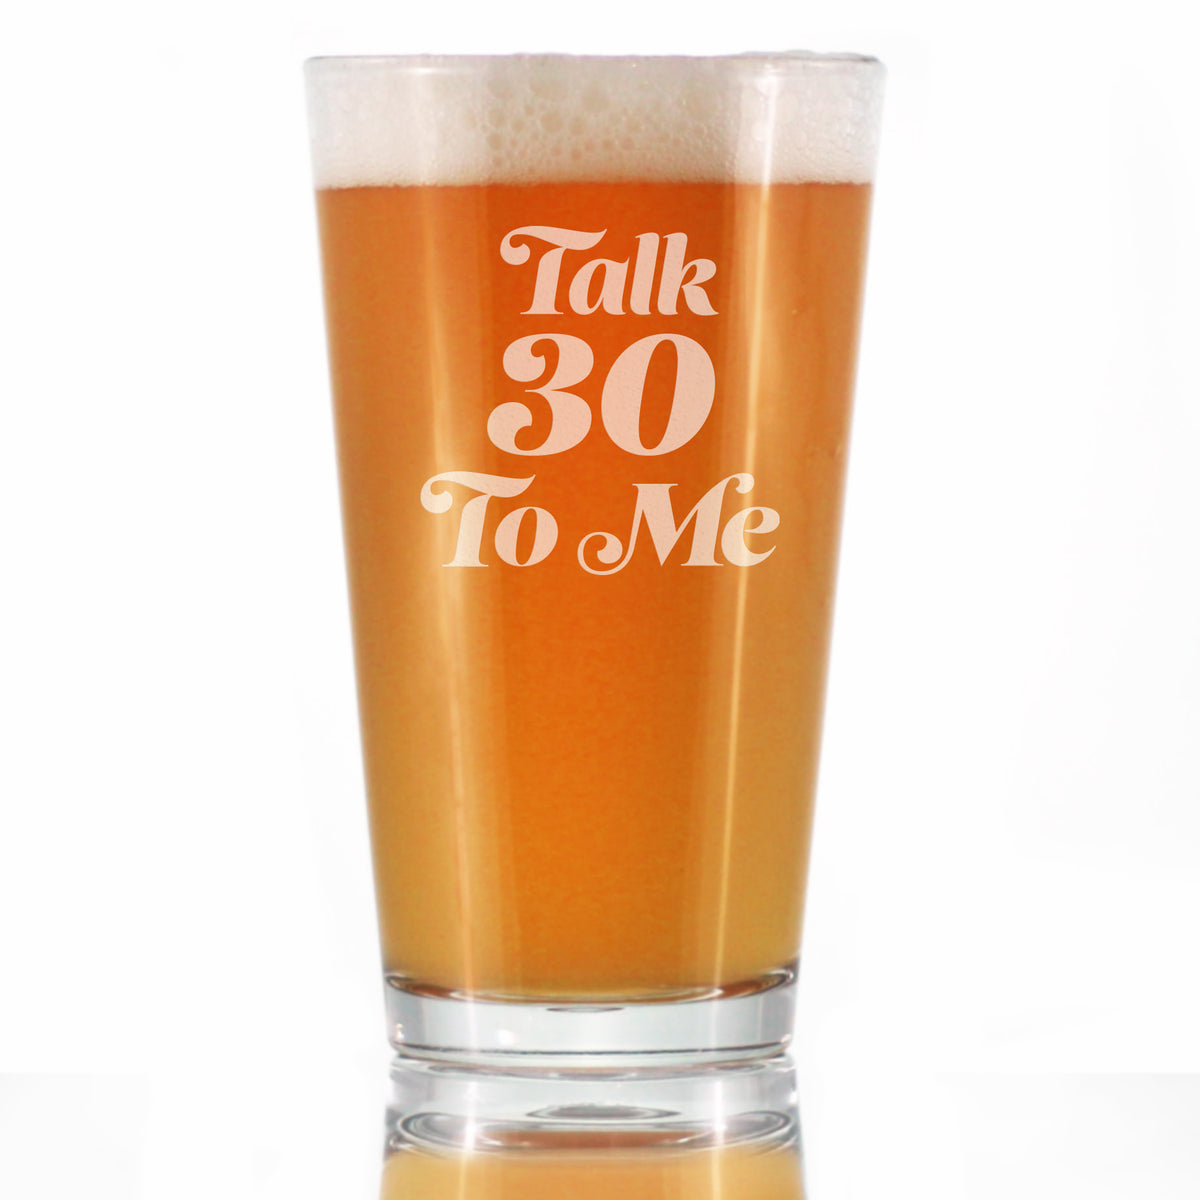 Talk 30 To Me - Funny 16 oz Pint Glass for Beer - 30th Birthday Gifts for Men or Women Turning 30 - Bday Party Decor